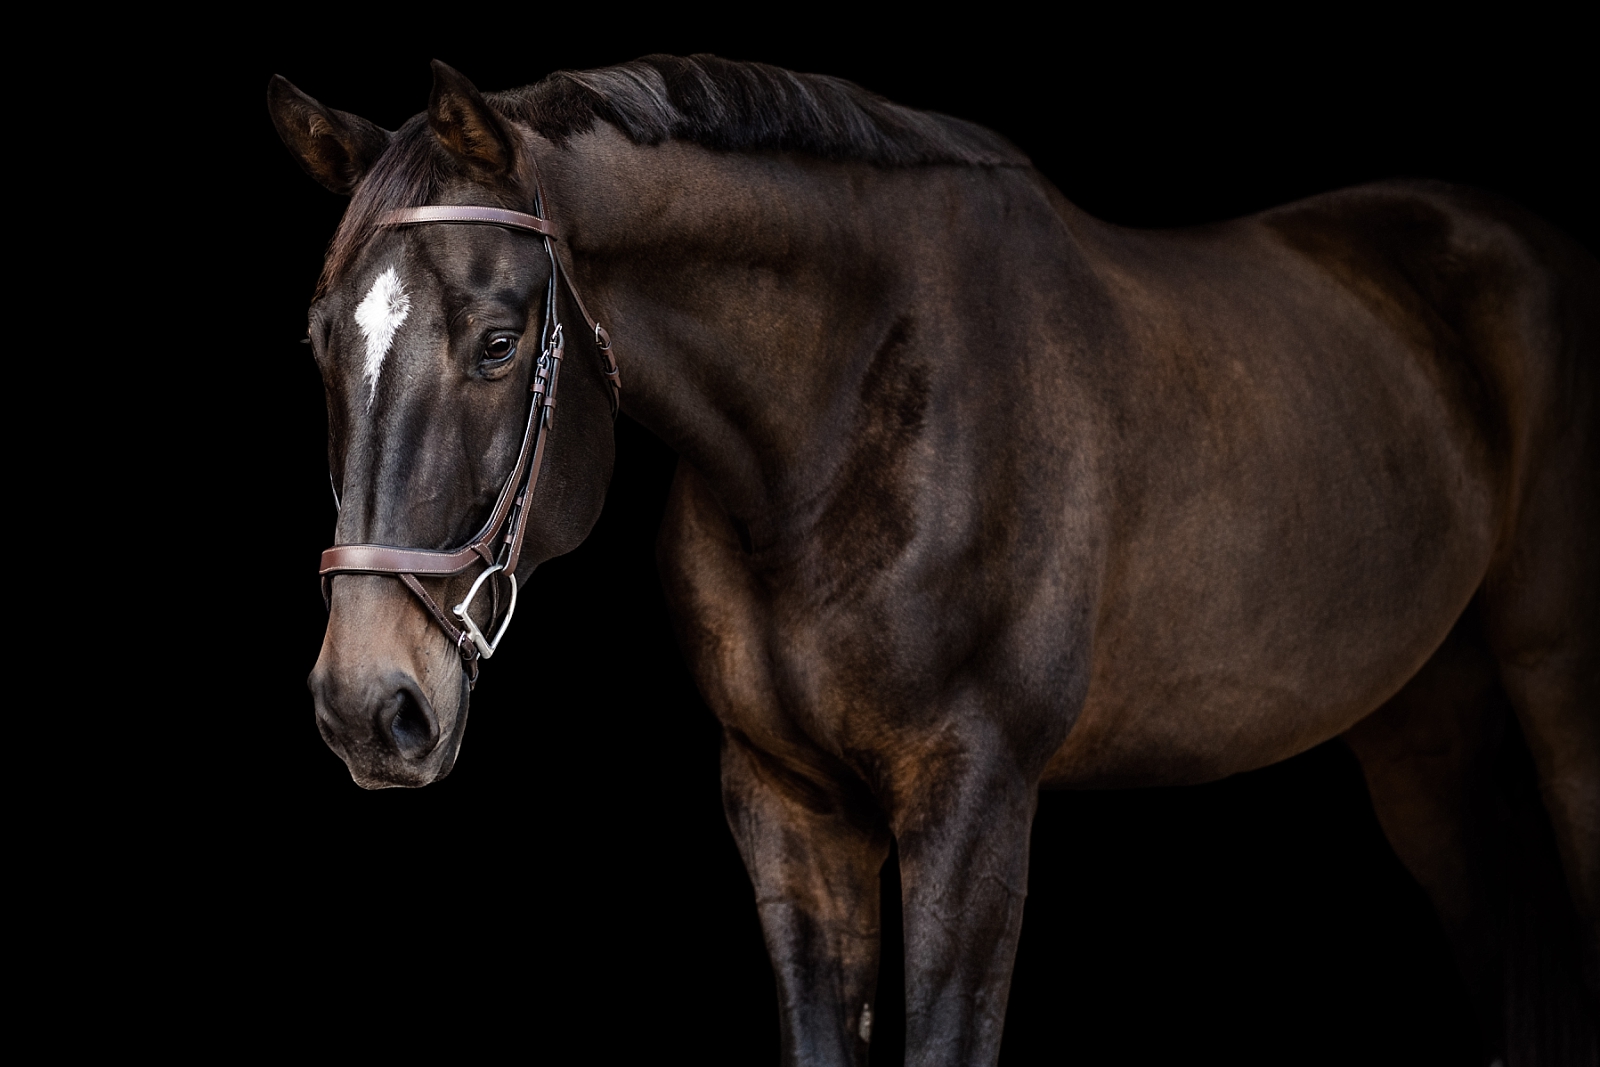 Gorgeous jumper gelding photographed on a black background in fine art form near Gainesville, FL at Archer Farms.